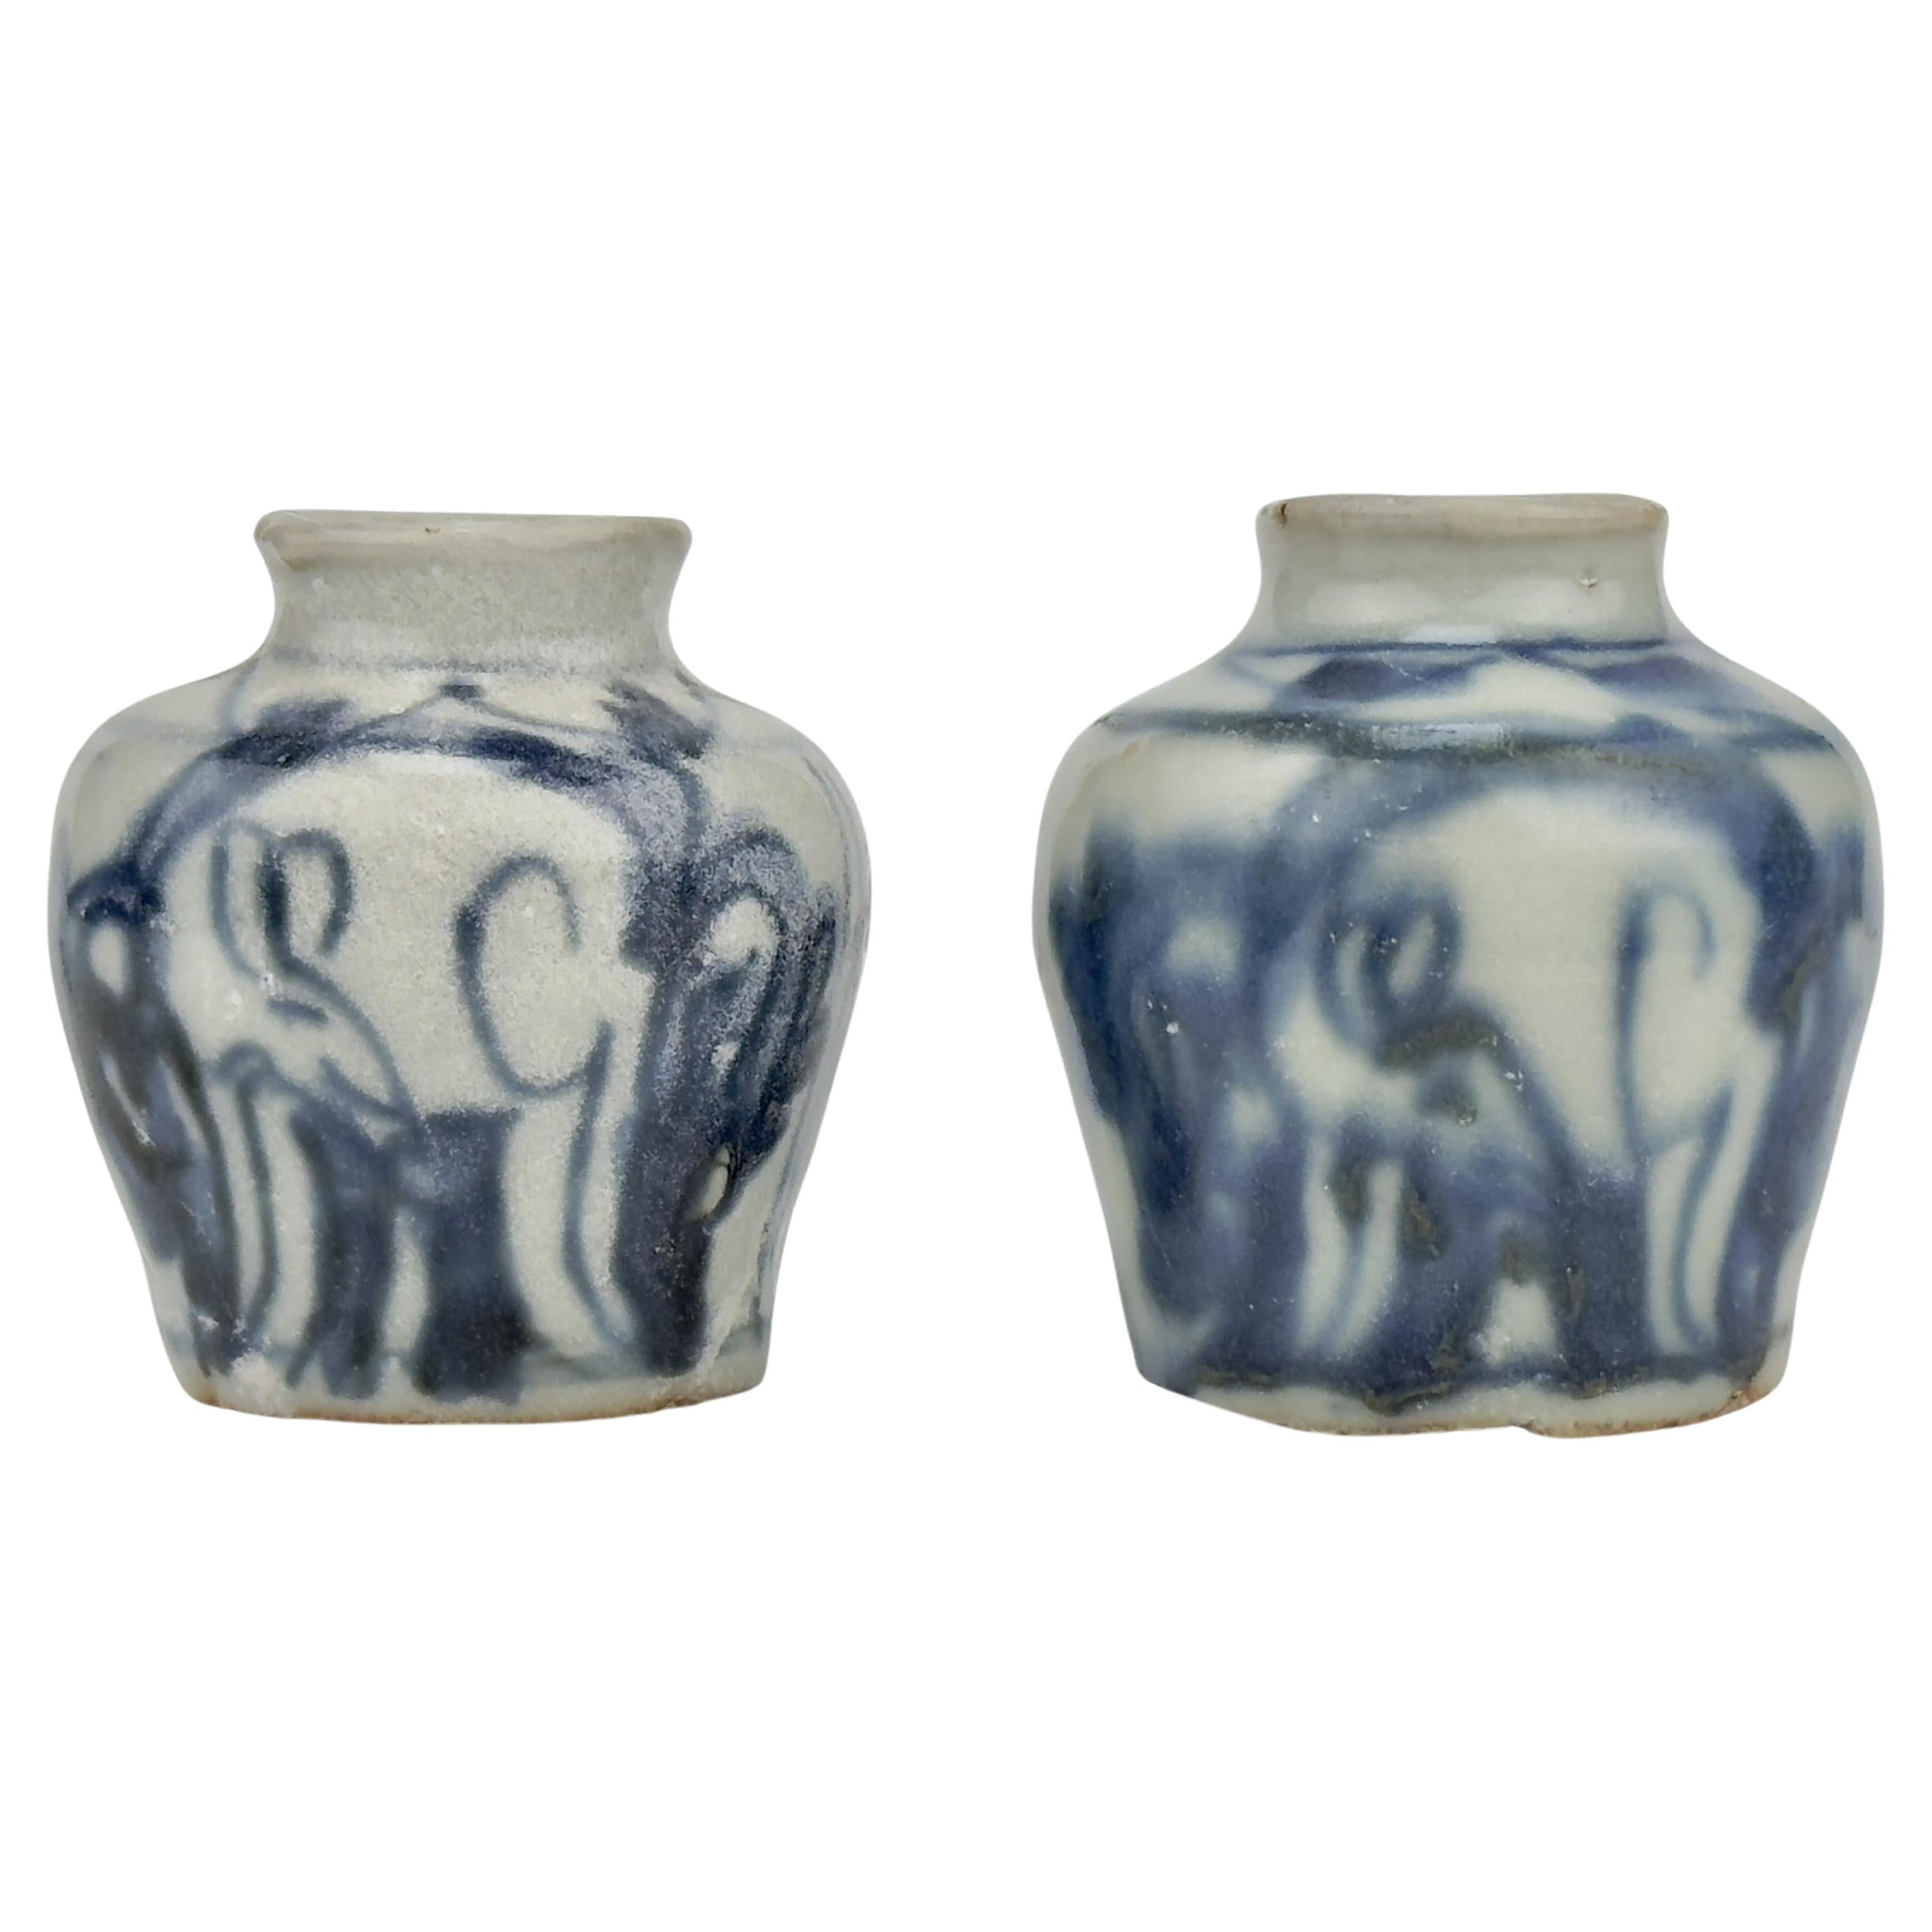 Pair of Small Jarlet with arabesque design, Late Ming Era(16-17th century) For Sale